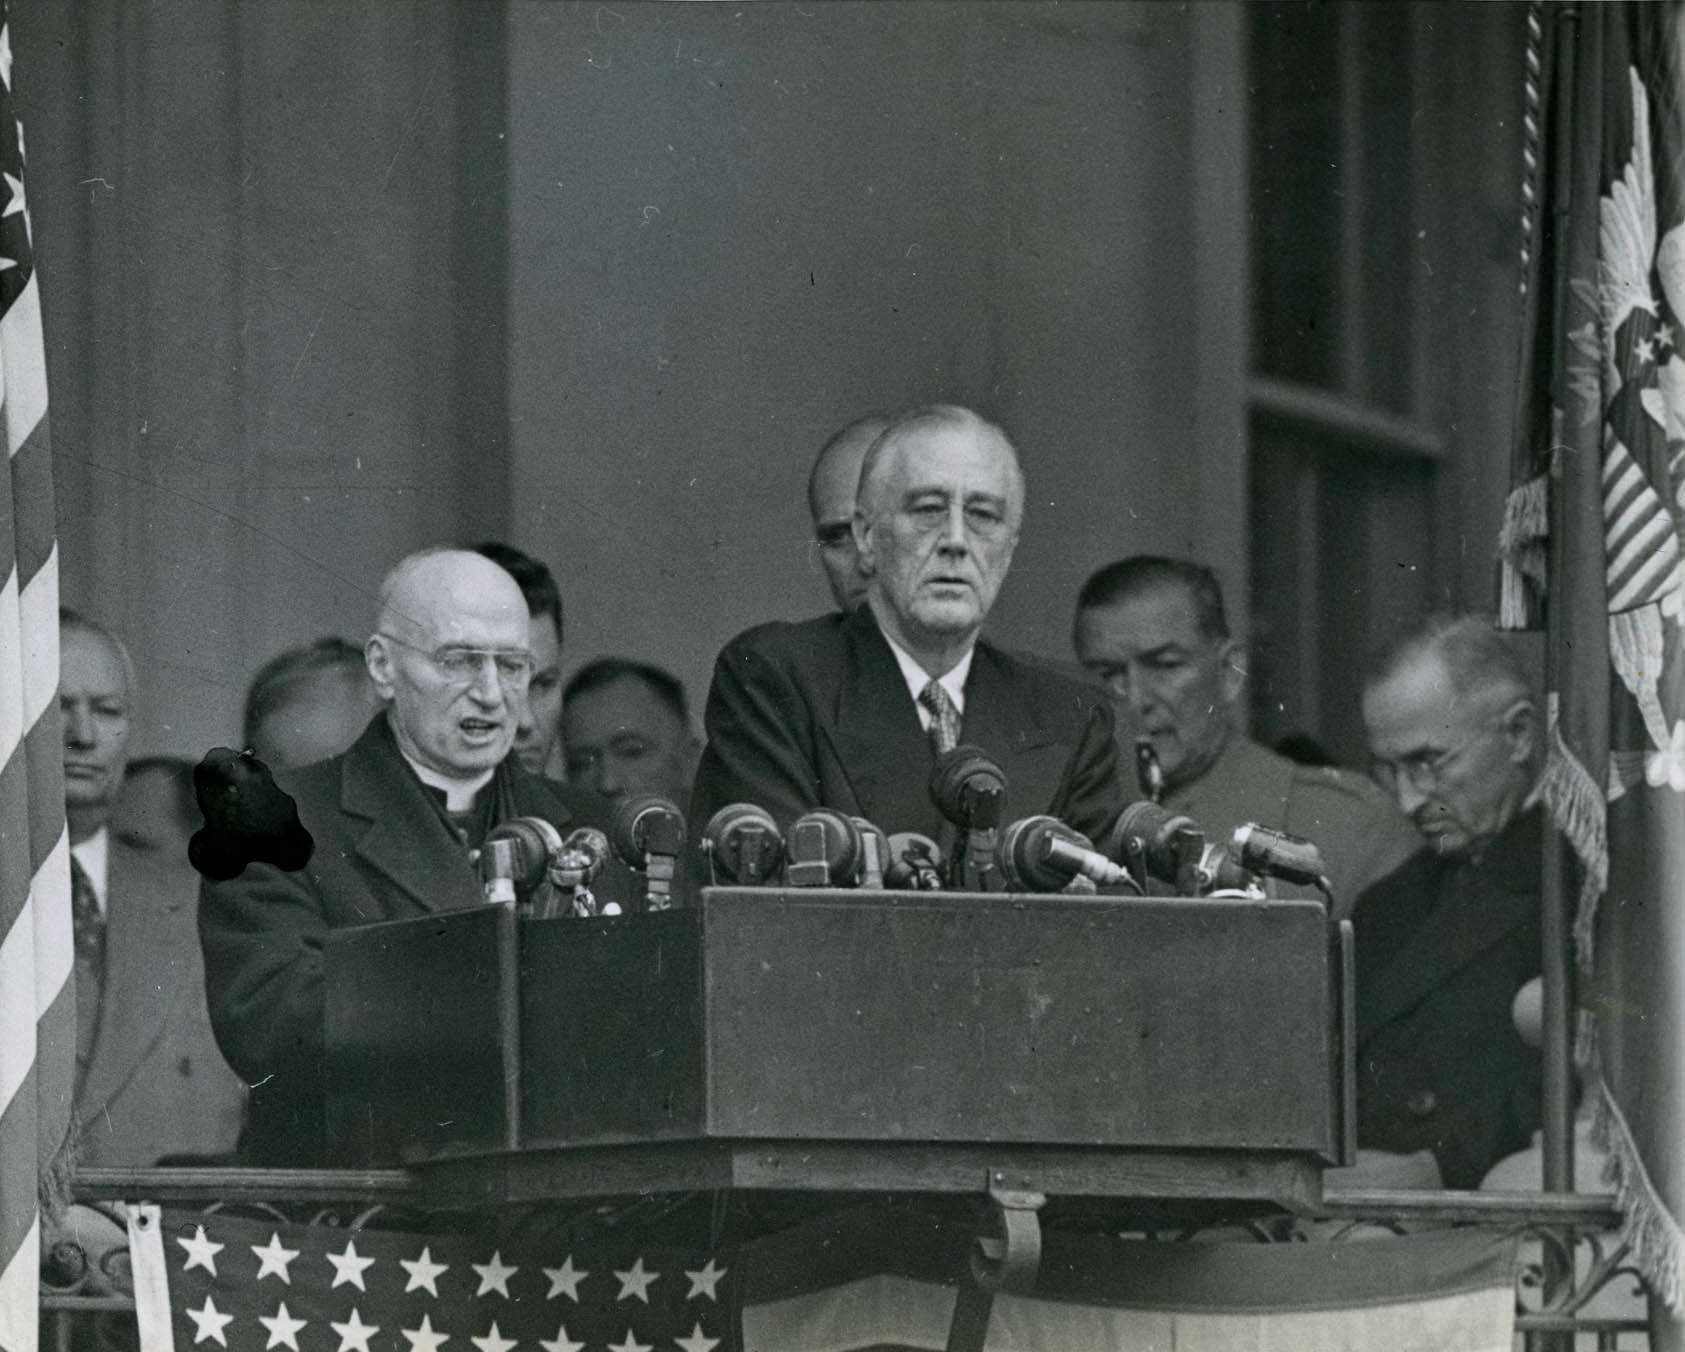 President Franklin Roosevelt during his inauguration ceremony on the west portico of the White House, Washington DC, United States, 20 Jan 1945. Note Harry Truman seated on the dias.